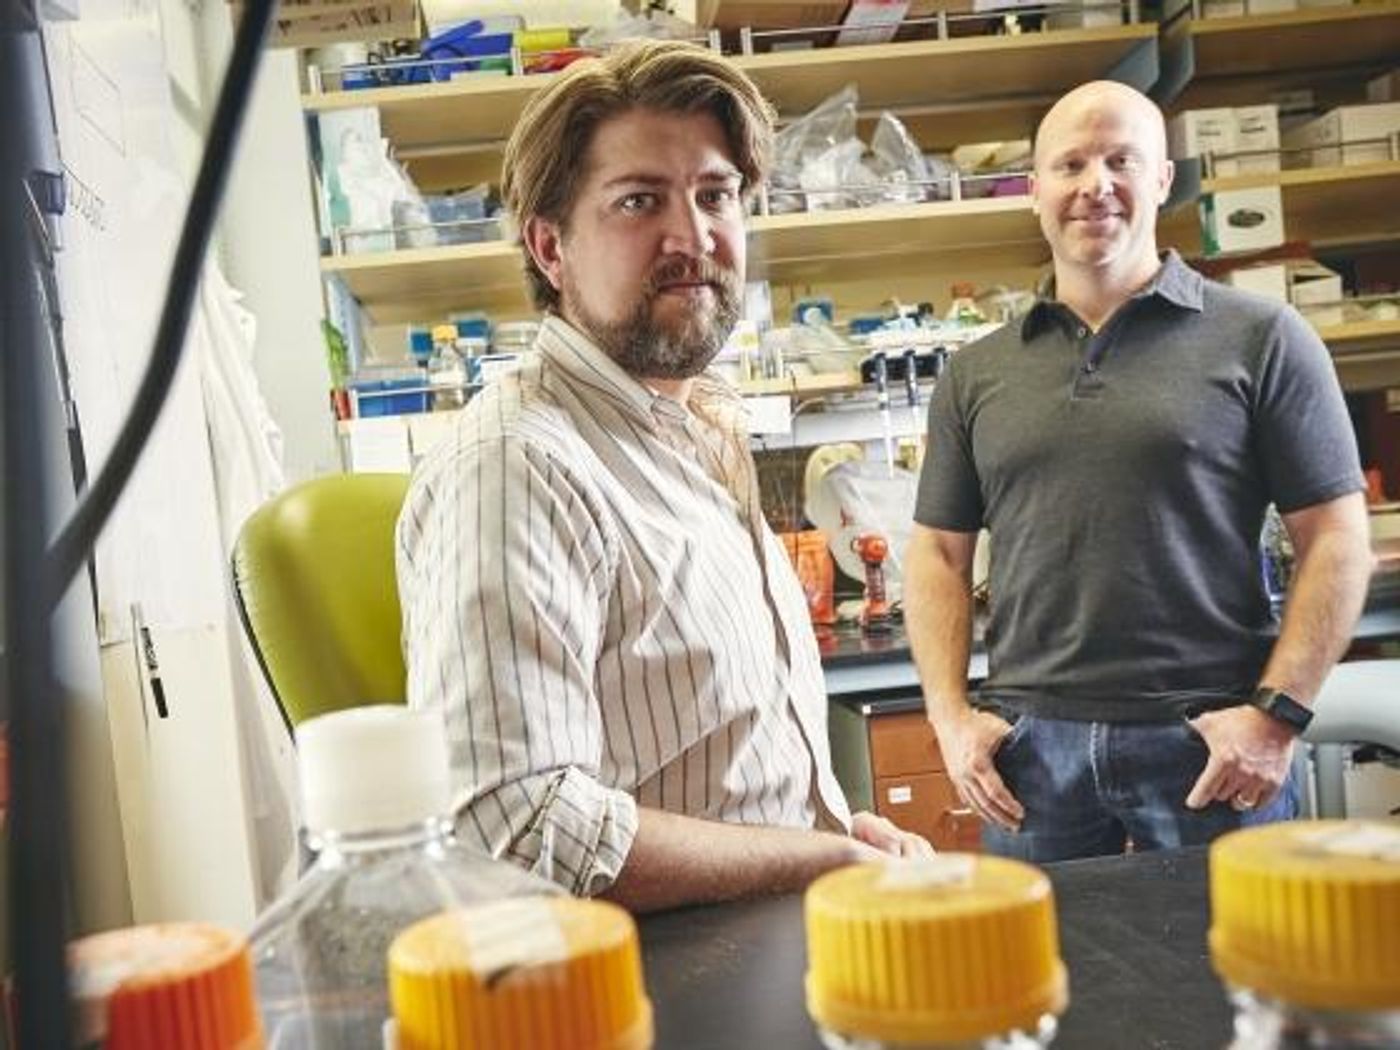 Michael Coryell, a doctoral student in the Department of Microbiology and Immunology at Montana State University and fellow in the Molecular Biosciences Program, left, and Seth Walk, associate professor in the Department of Microbiology and Immunology / Credit: Adrian Sanchez-Gonzalez